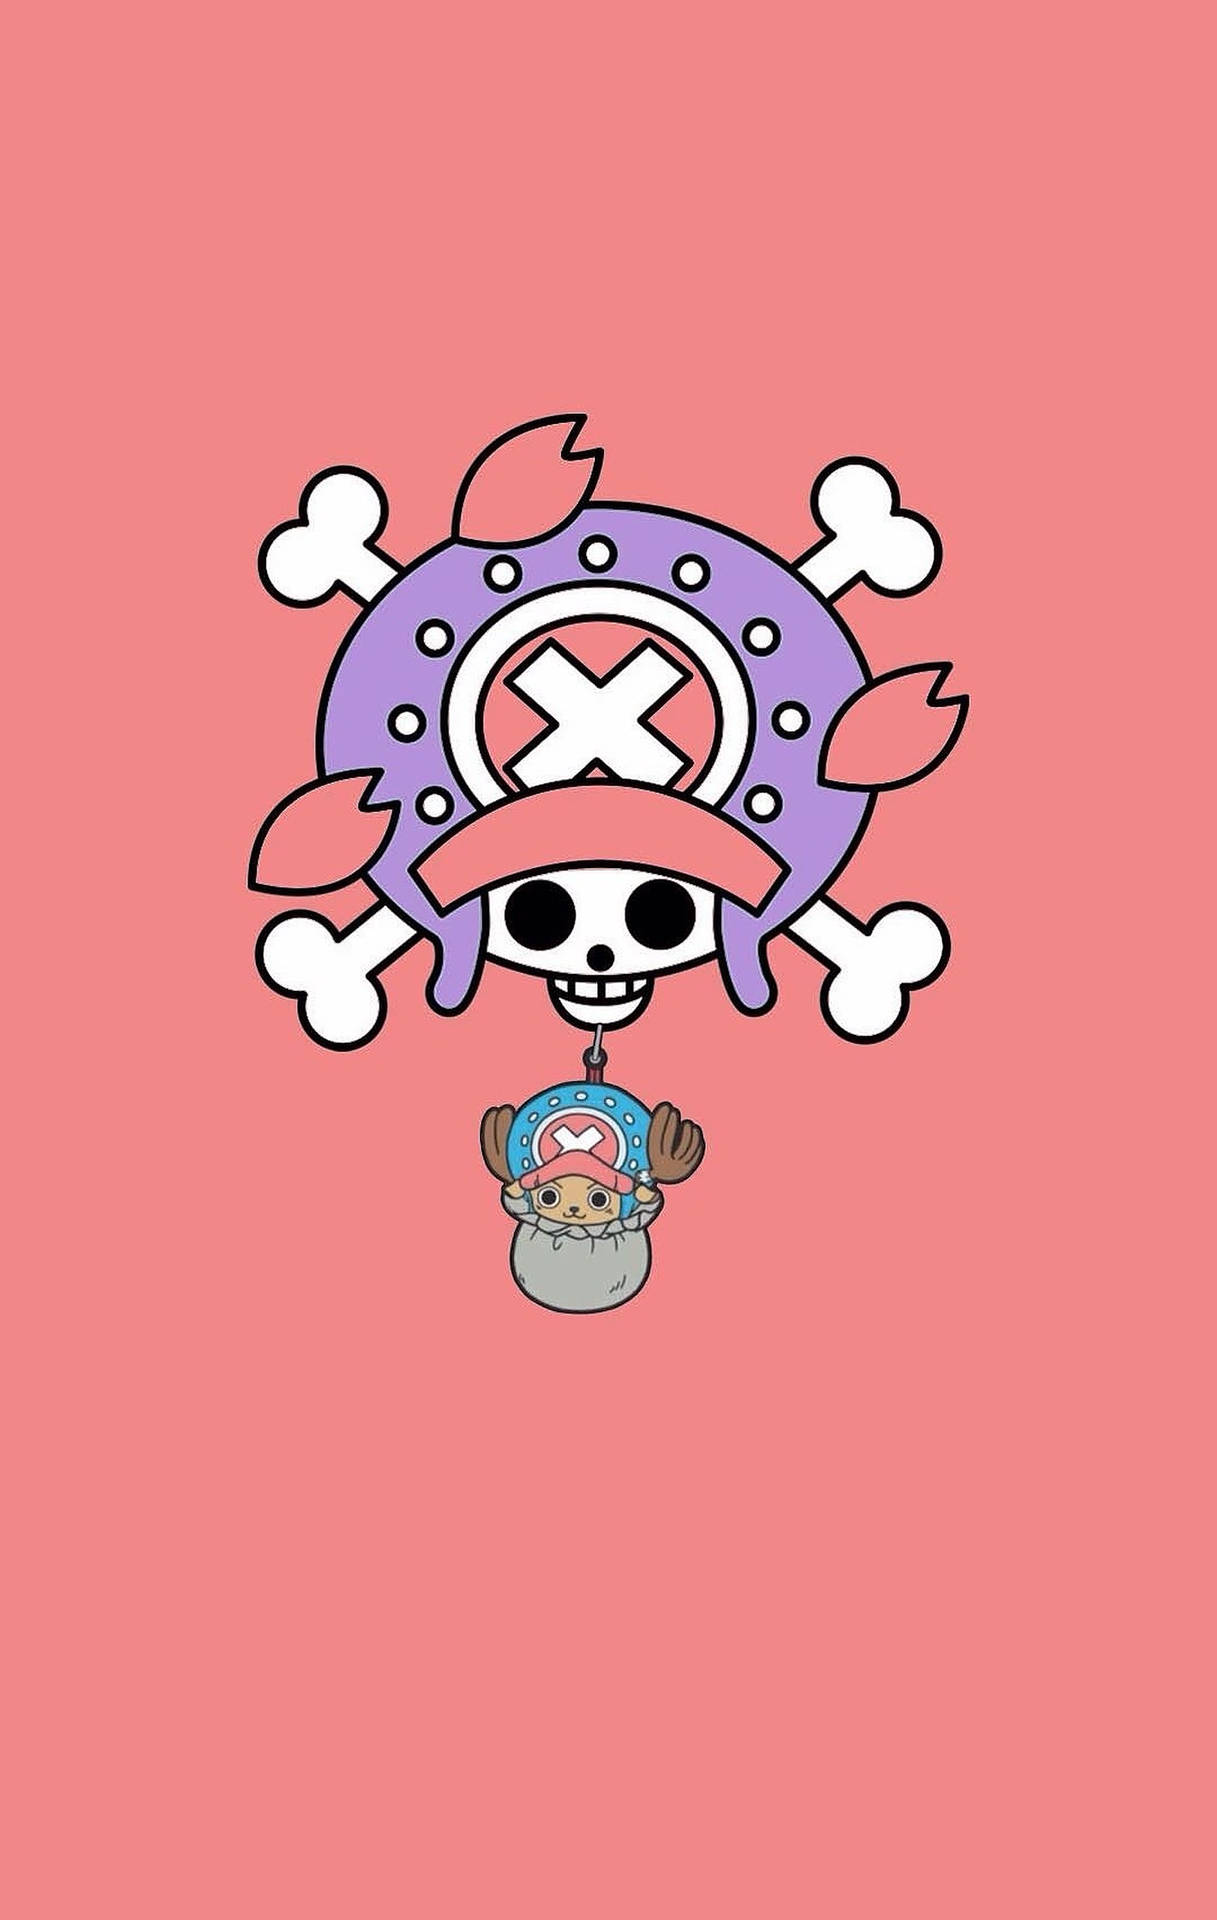 Chopper And Skull One Piece IPhone Wallpaper